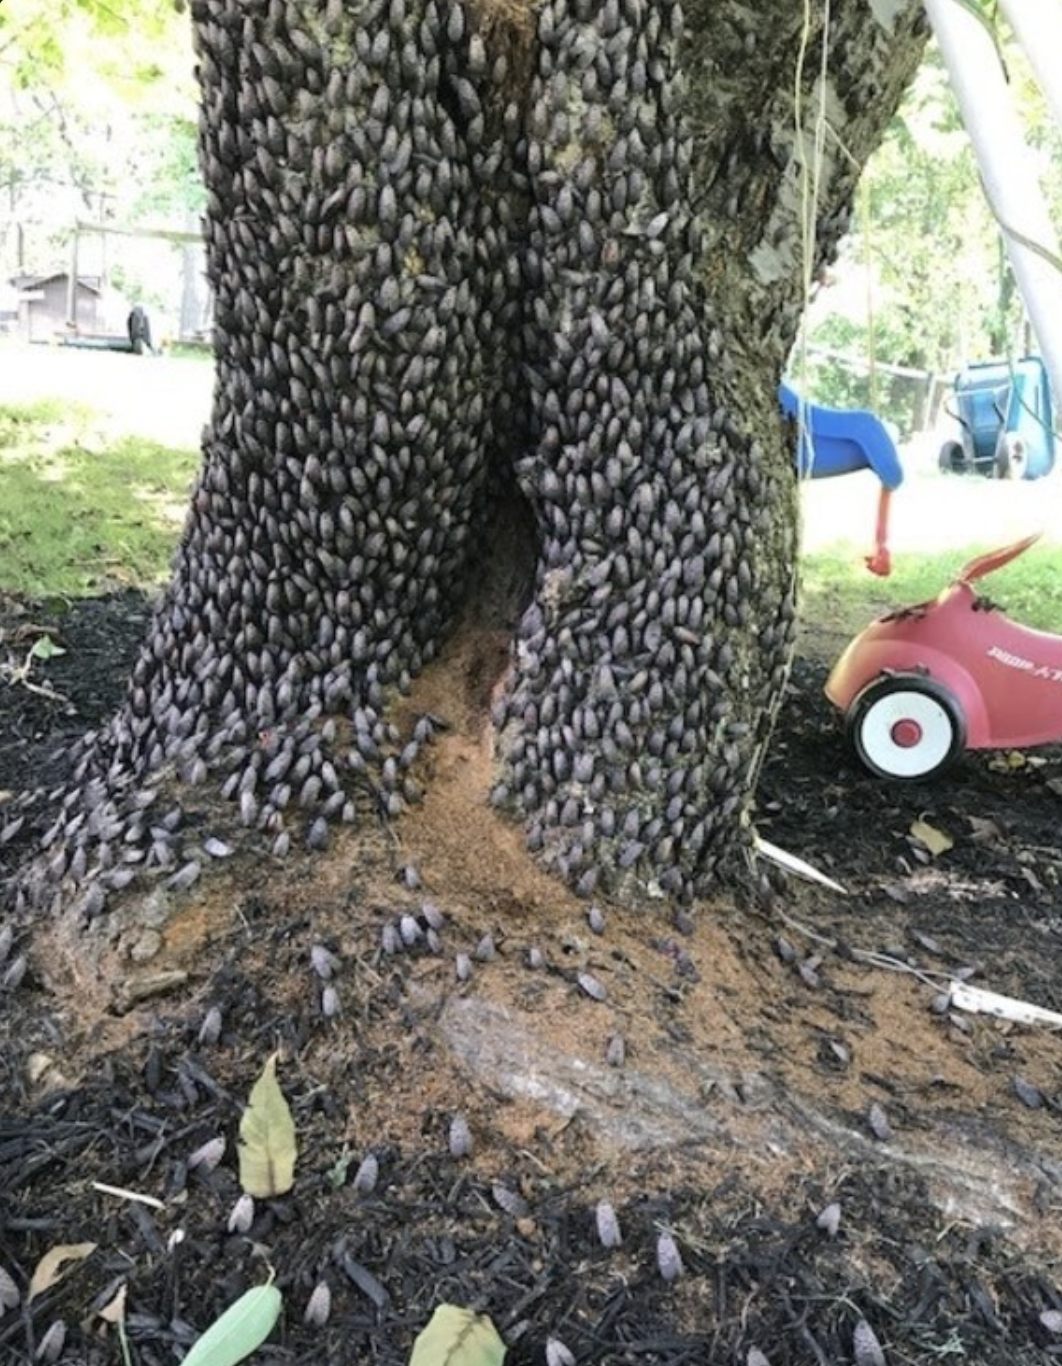 An infestation of invasive spotted lanternflies.